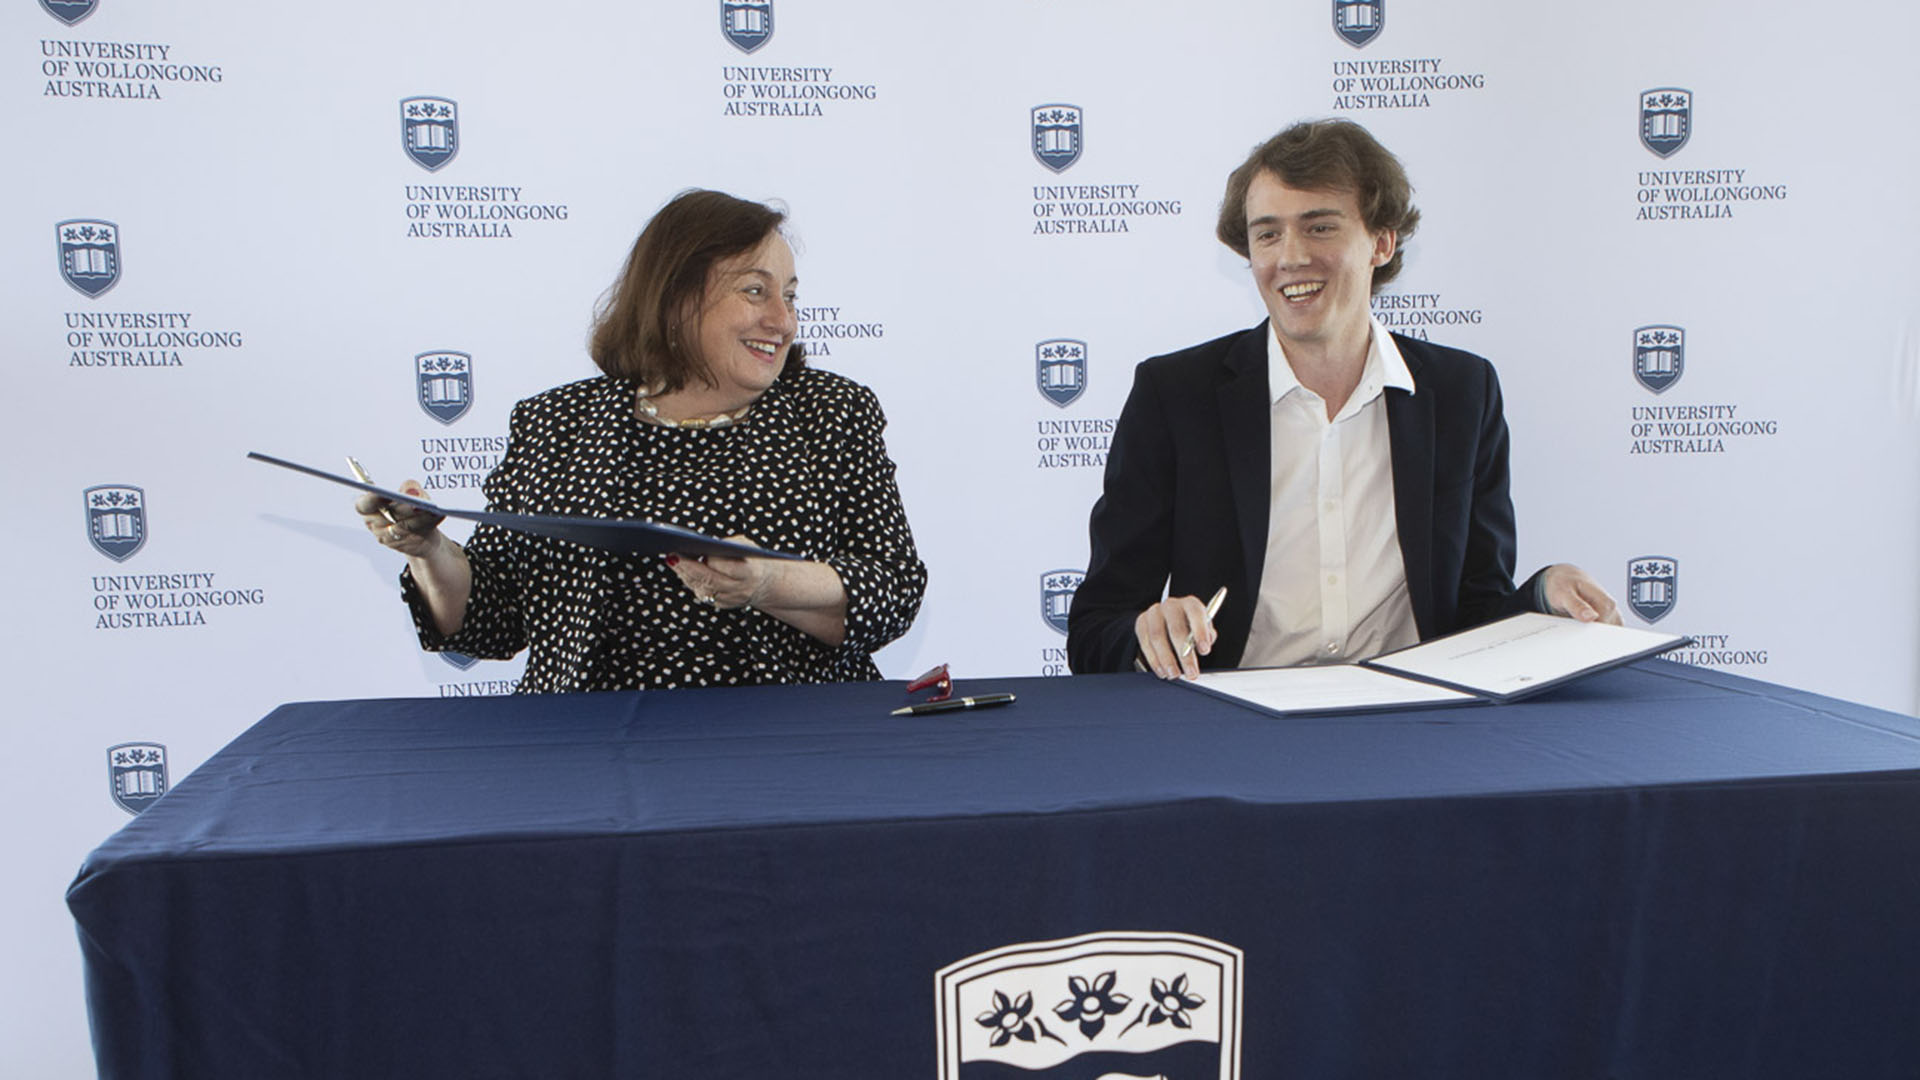 UOW Vice-Chancellor Patricia M. Davidson and Student Advisory Council Chair Jackson Cocks sign Students as Partners